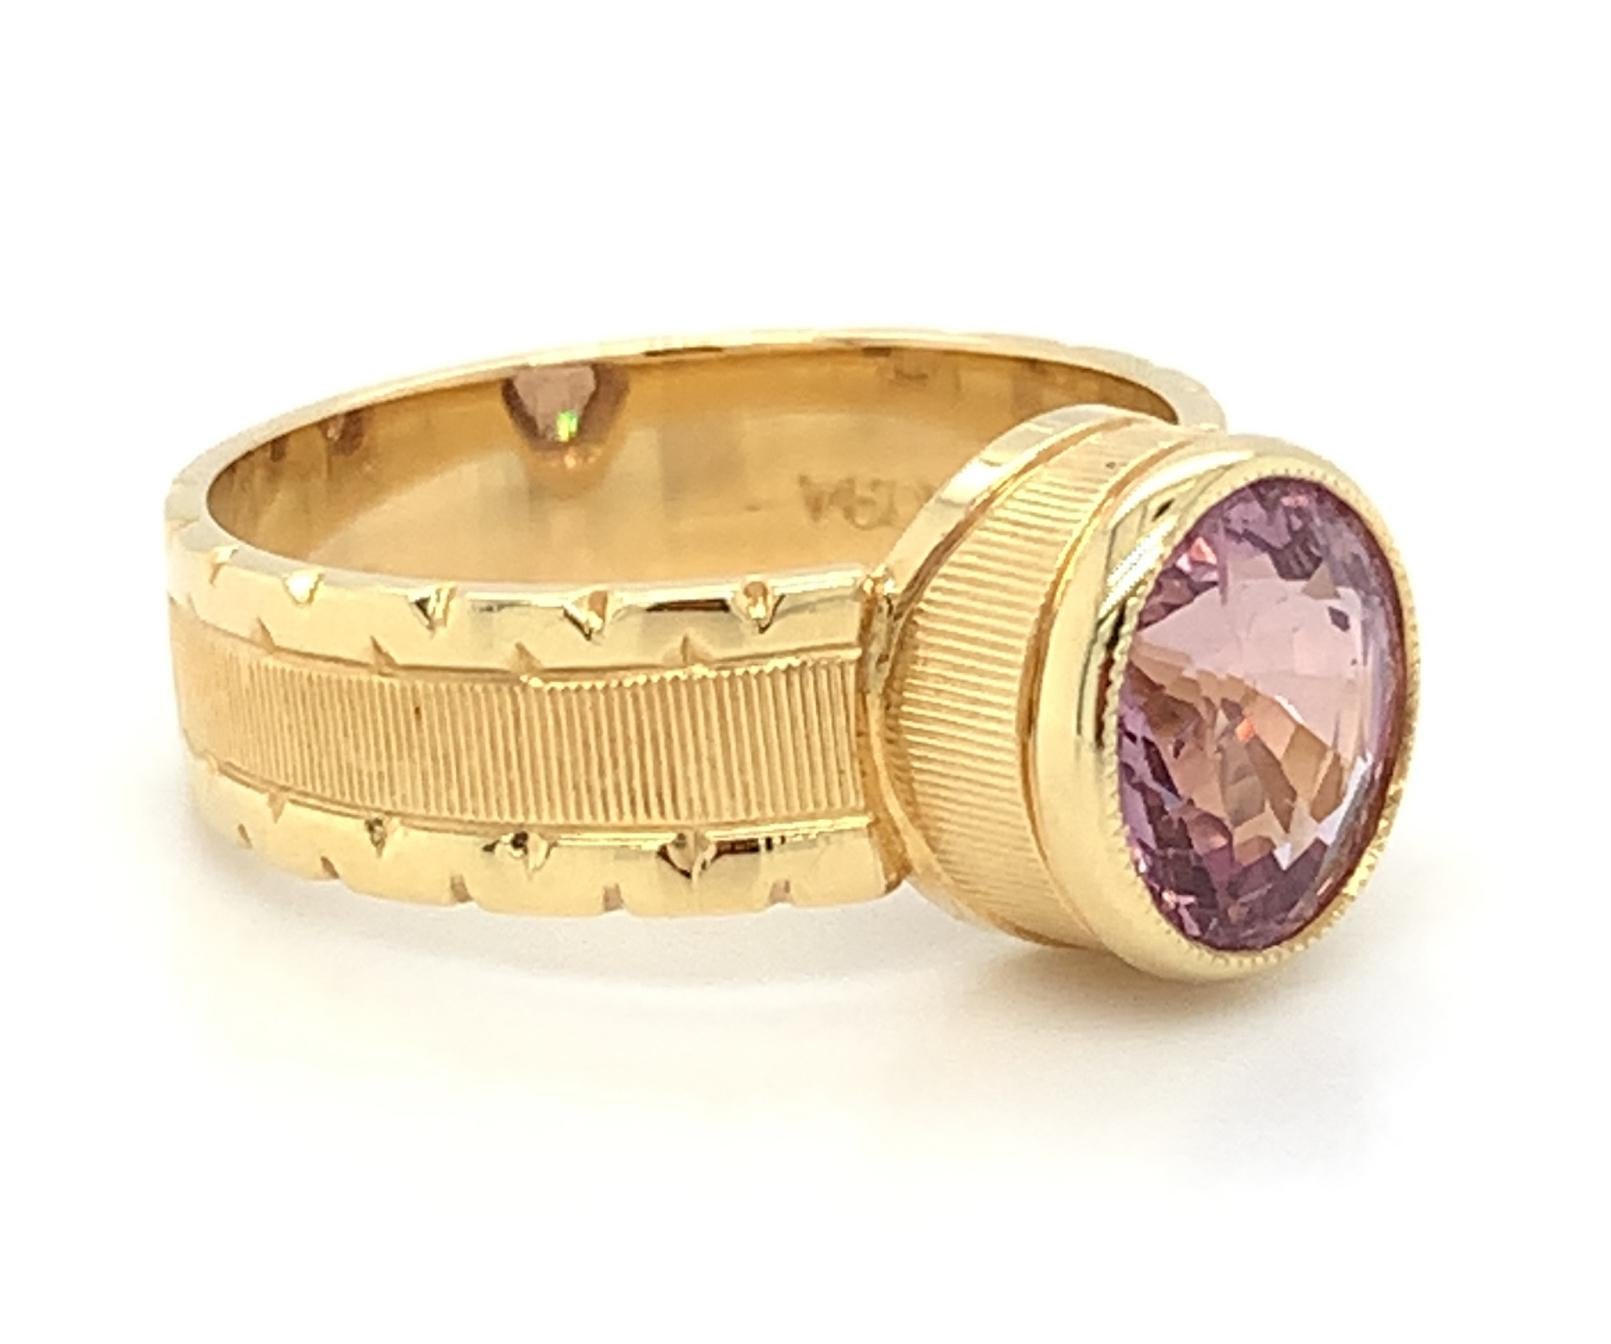 2.03 ct. Pink Spinel Band Ring in 18k Yellow Gold   For Sale 1